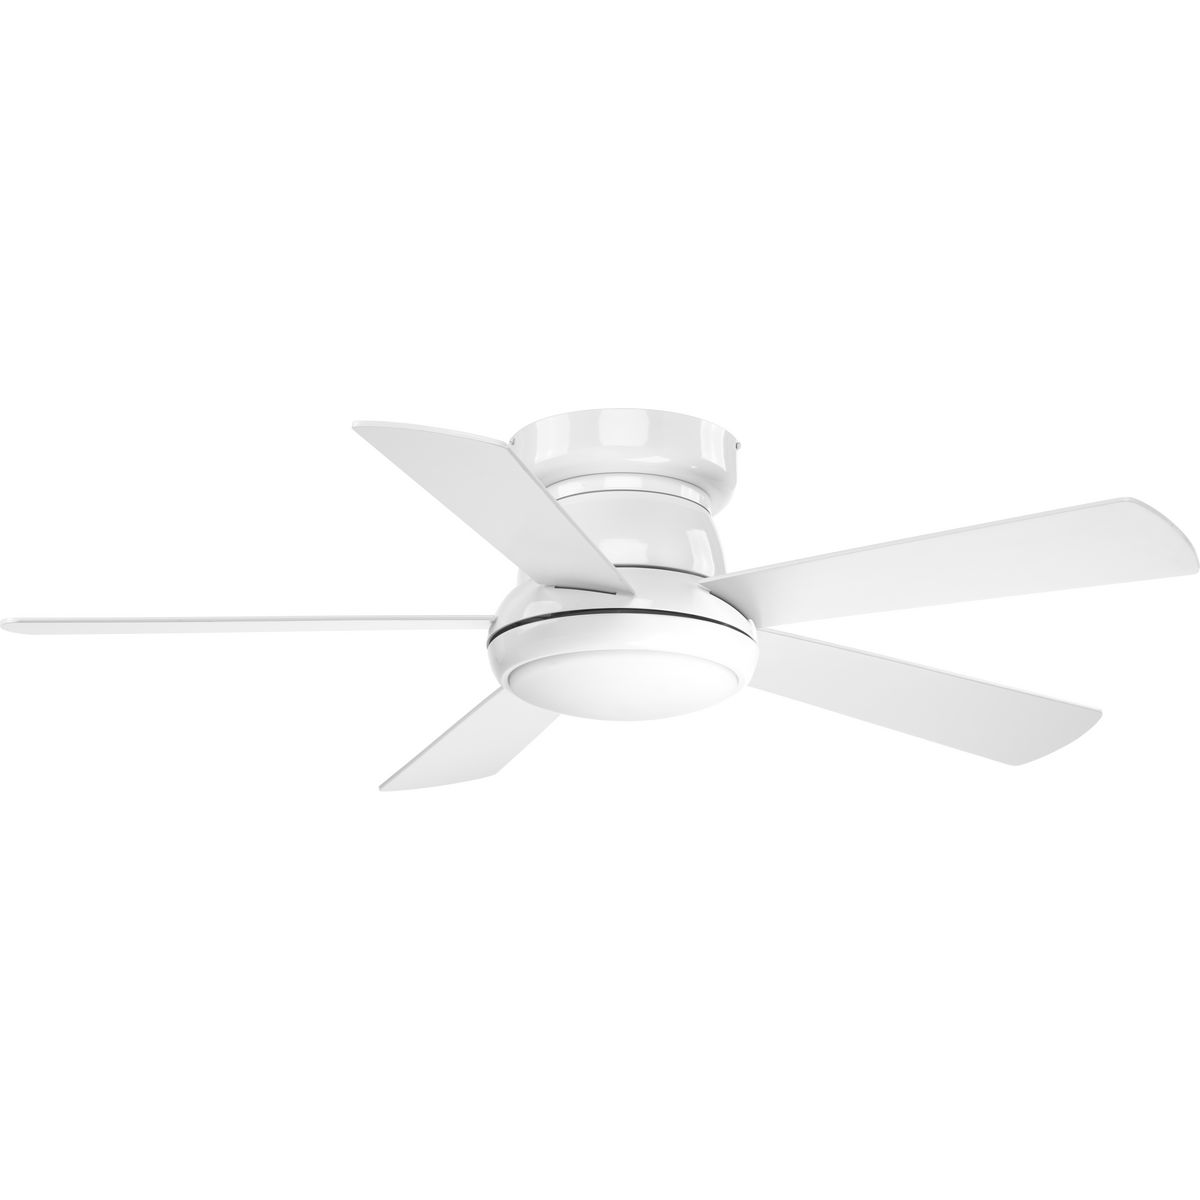 Five-blade 52 inch Vox Hugger ceiling fan features white blades and a White finish. The LED light source offers both form and function with energy- and cost-savings benefits. A shatterproof, white opal shade contains a 17W dimmable, 3000K LED module. A remote control with batteries is included. The fan mounts close to the ceiling.